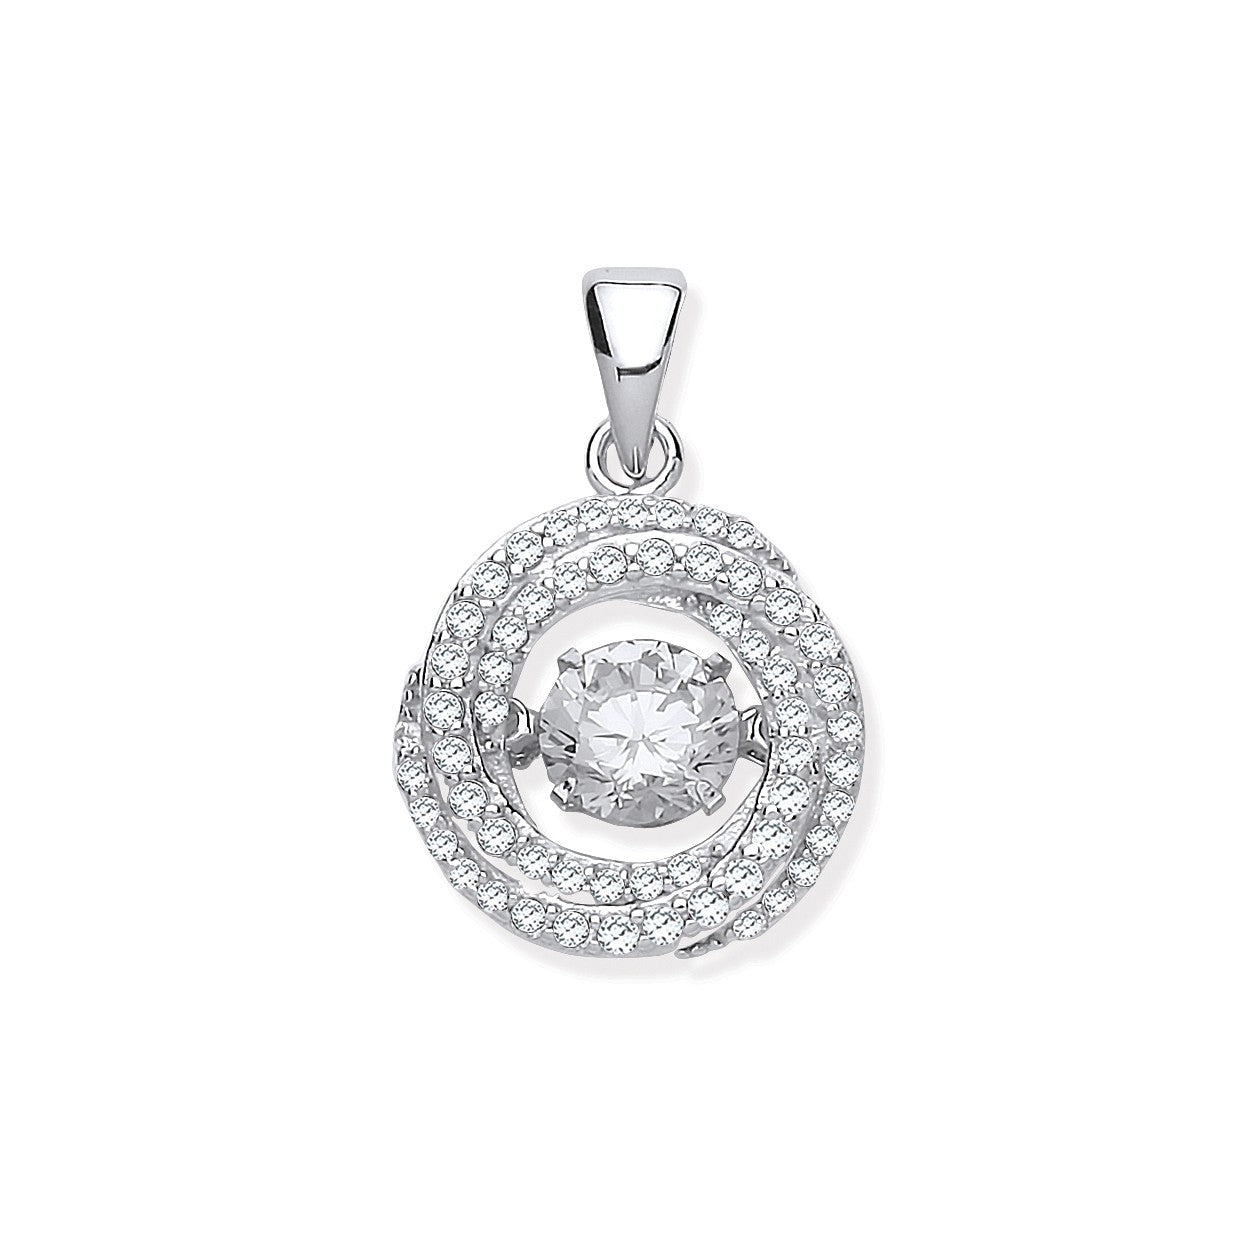 925 Sterling Silver Cz Swirl Pendant with Hanging Shimering Cz - FJewellery